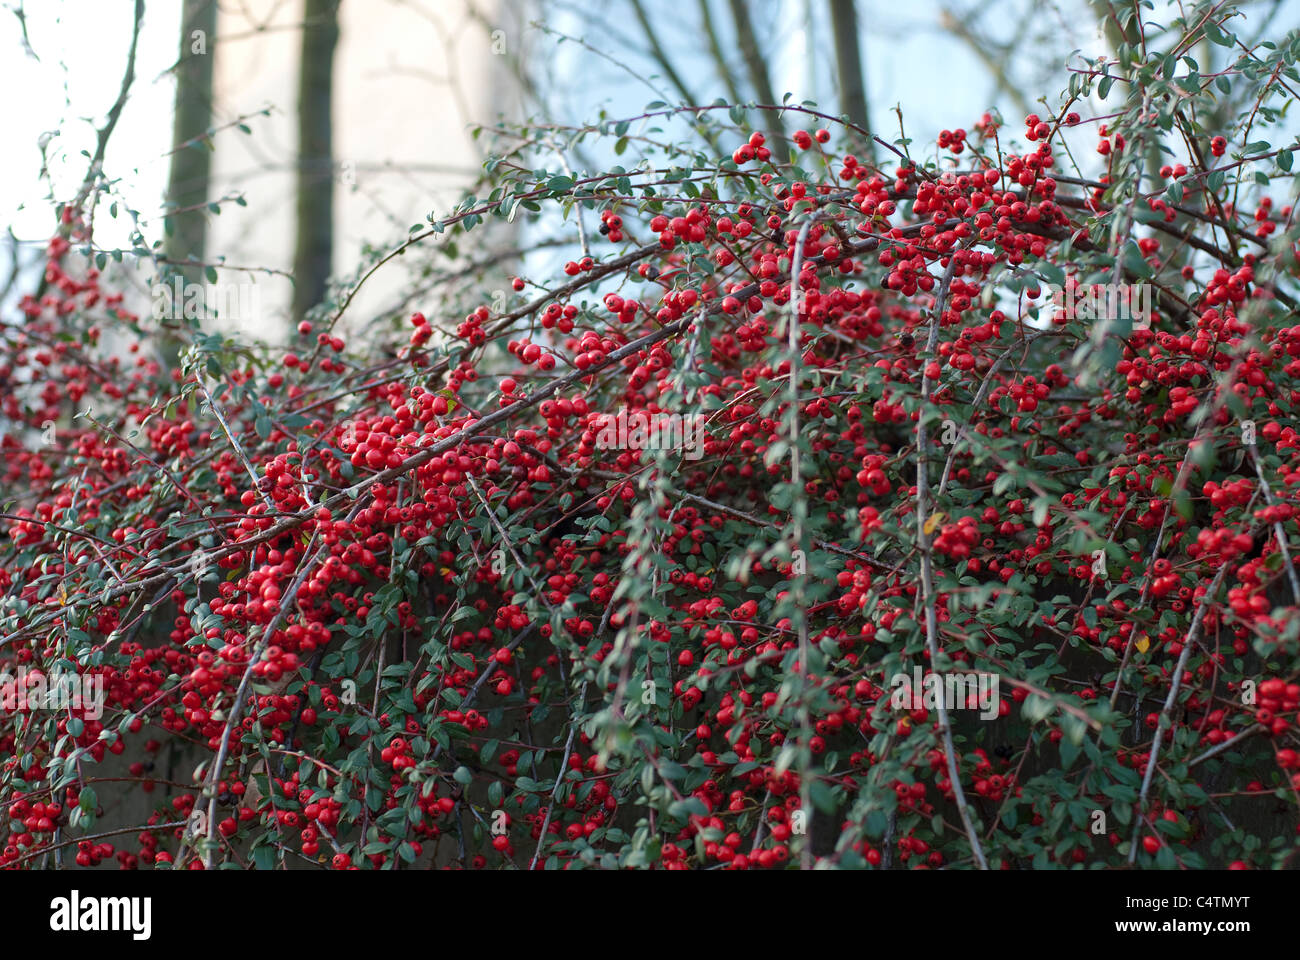 Cotoneaster bush filled with red berries on a cold winter day Stock Photo